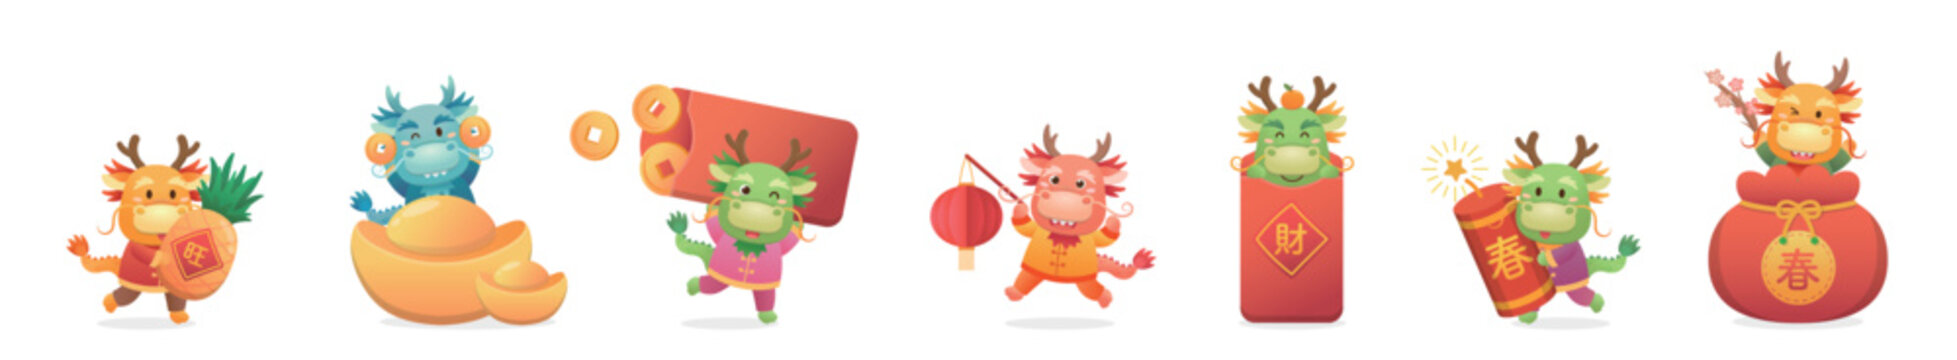 A set of cute Chinese dragon characters or mascots or cartoon characters, playful and cute, vector elements for the Chinese New Year, translation: spring and fortune